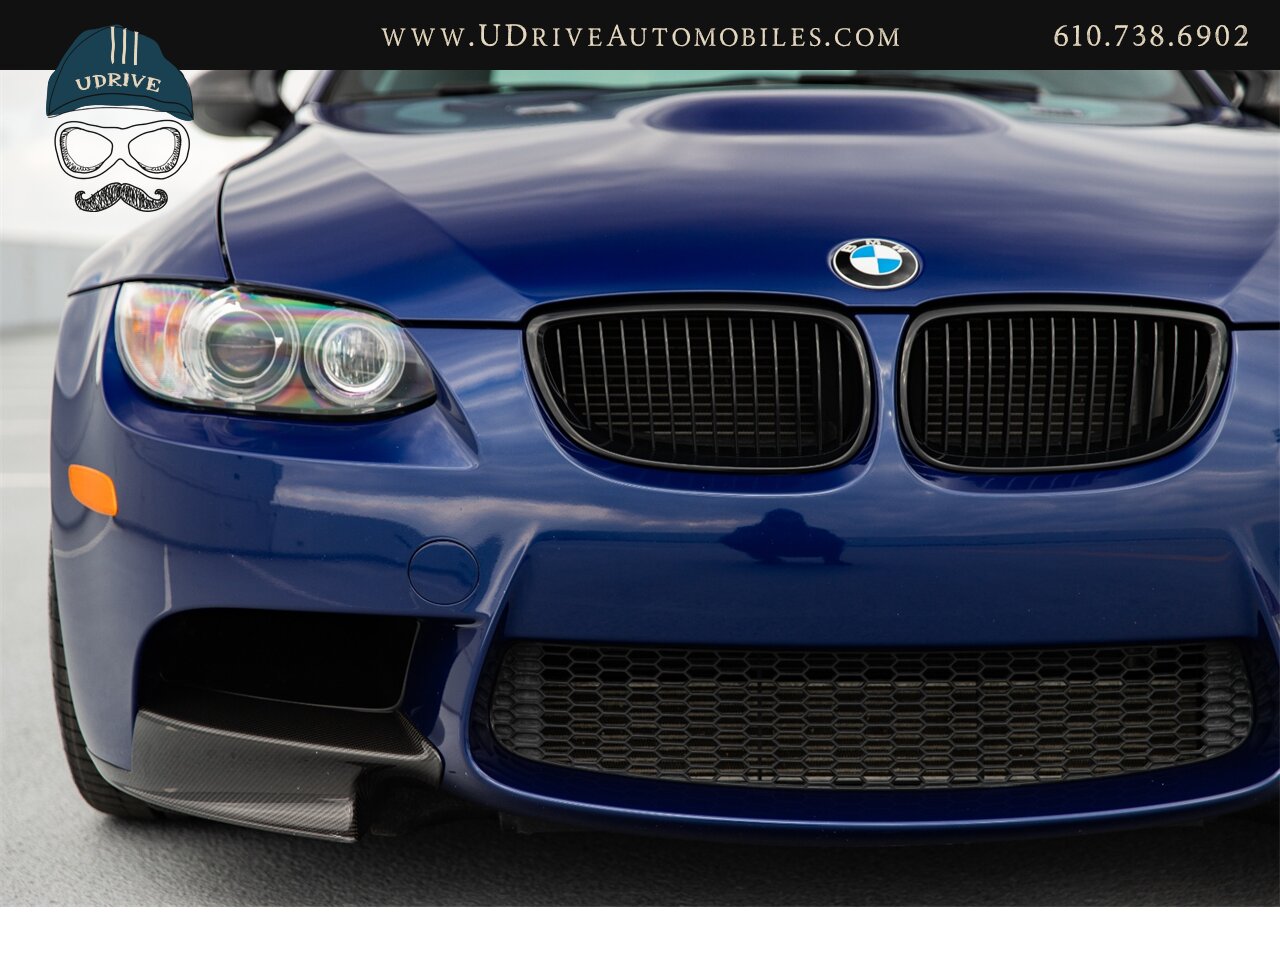 2011 BMW M3 E92 6 Speed Manual Competition Pkg Interlagos Blue  16k Miles Nav PDC EDC Comf Acc - Photo 14 - West Chester, PA 19382